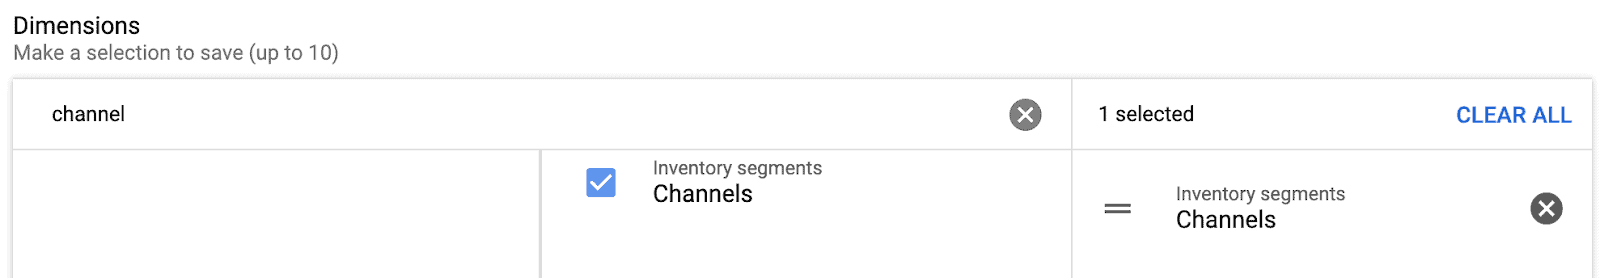 channels for dimensions